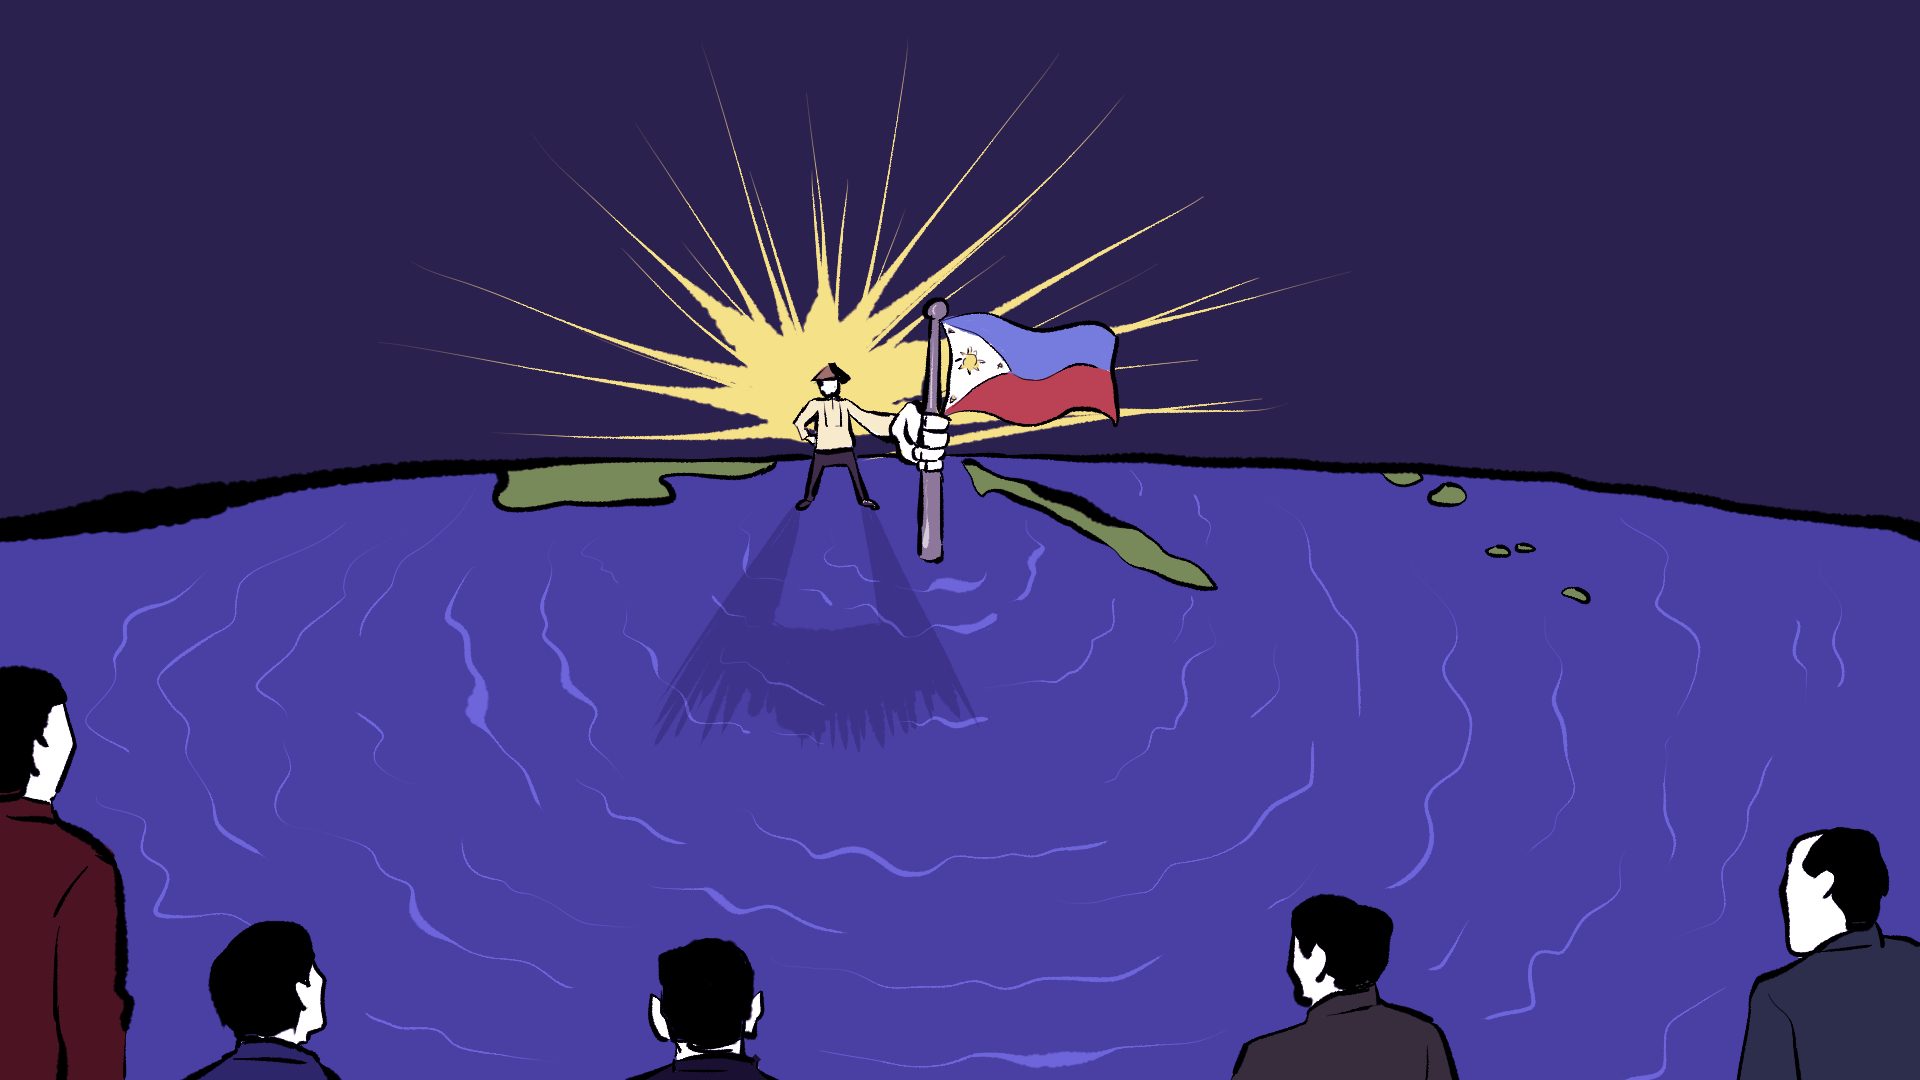 [OPINION] Law and justice in the West Philippine Sea